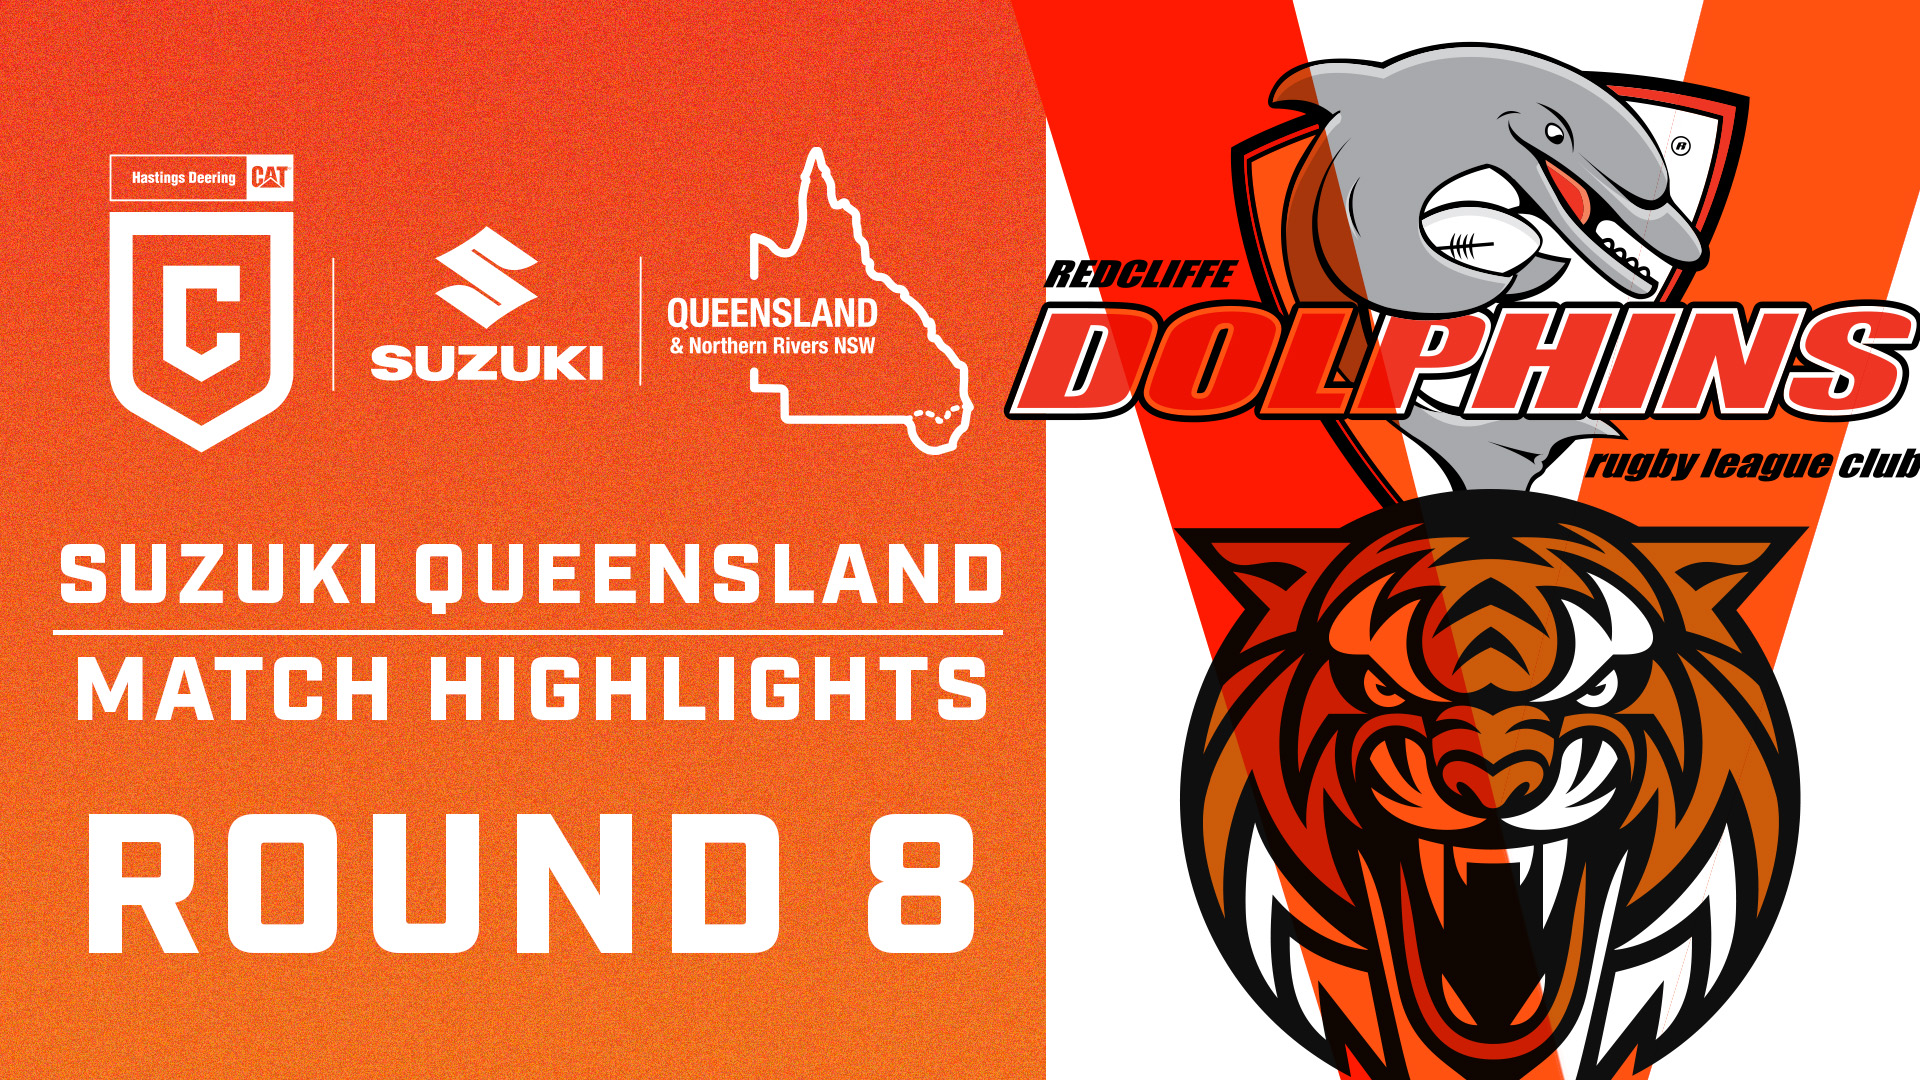 Suzuki Match Highlights from Round 8 Hastings Deering Colts Brisbane Tigers v Redcliffe Dolphins